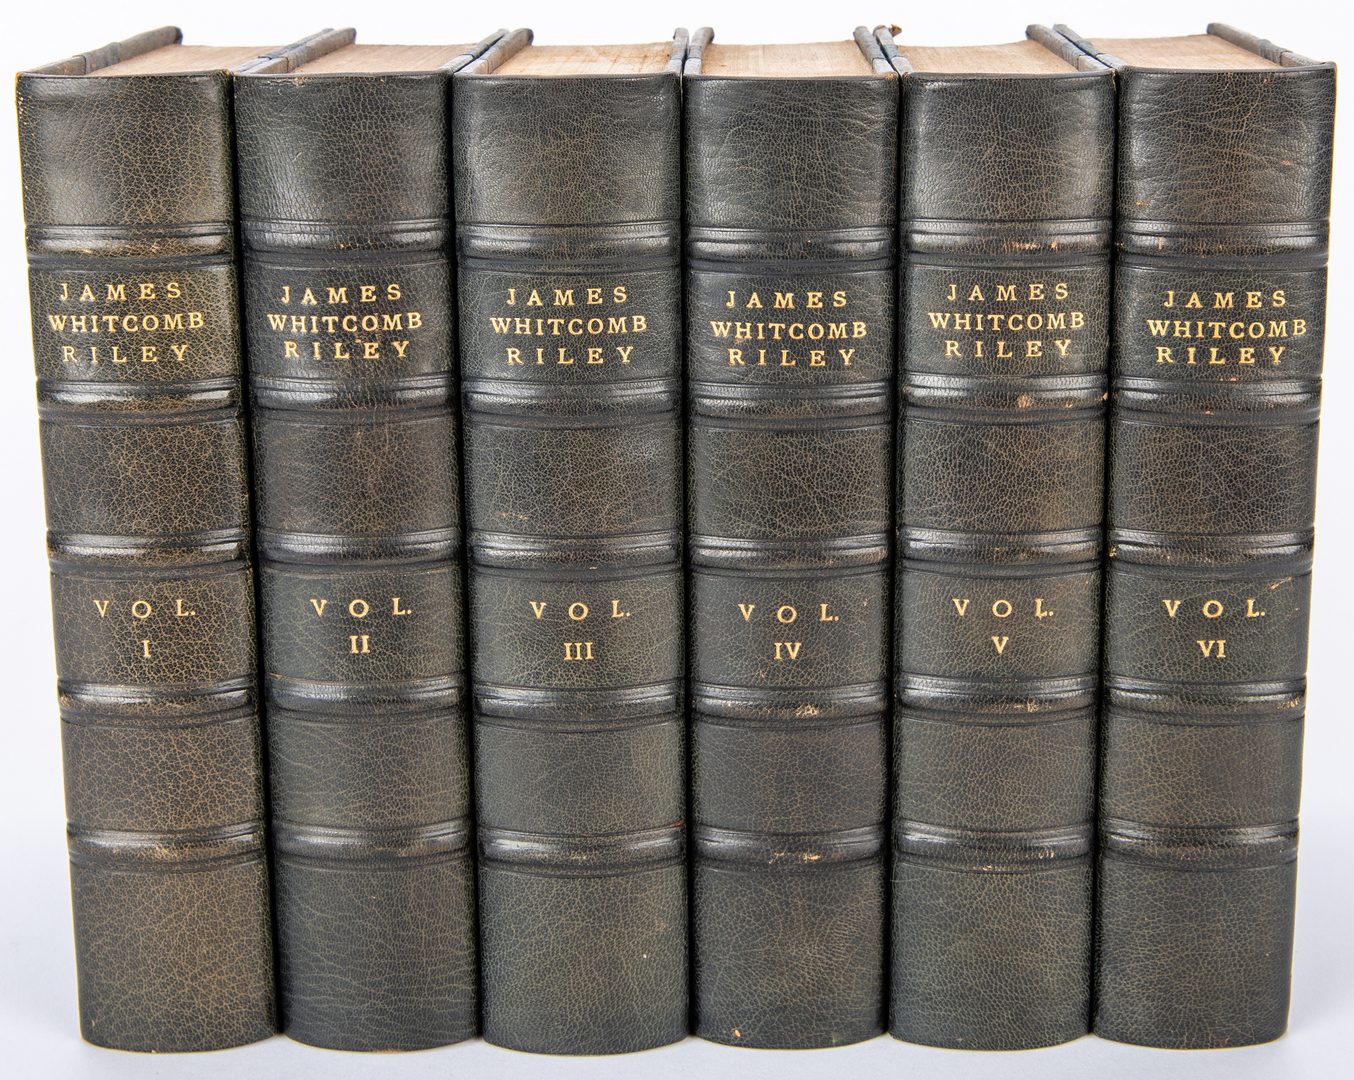 Lot 107: The Complete Works of J.W. Riley, 6 Vols., 1913